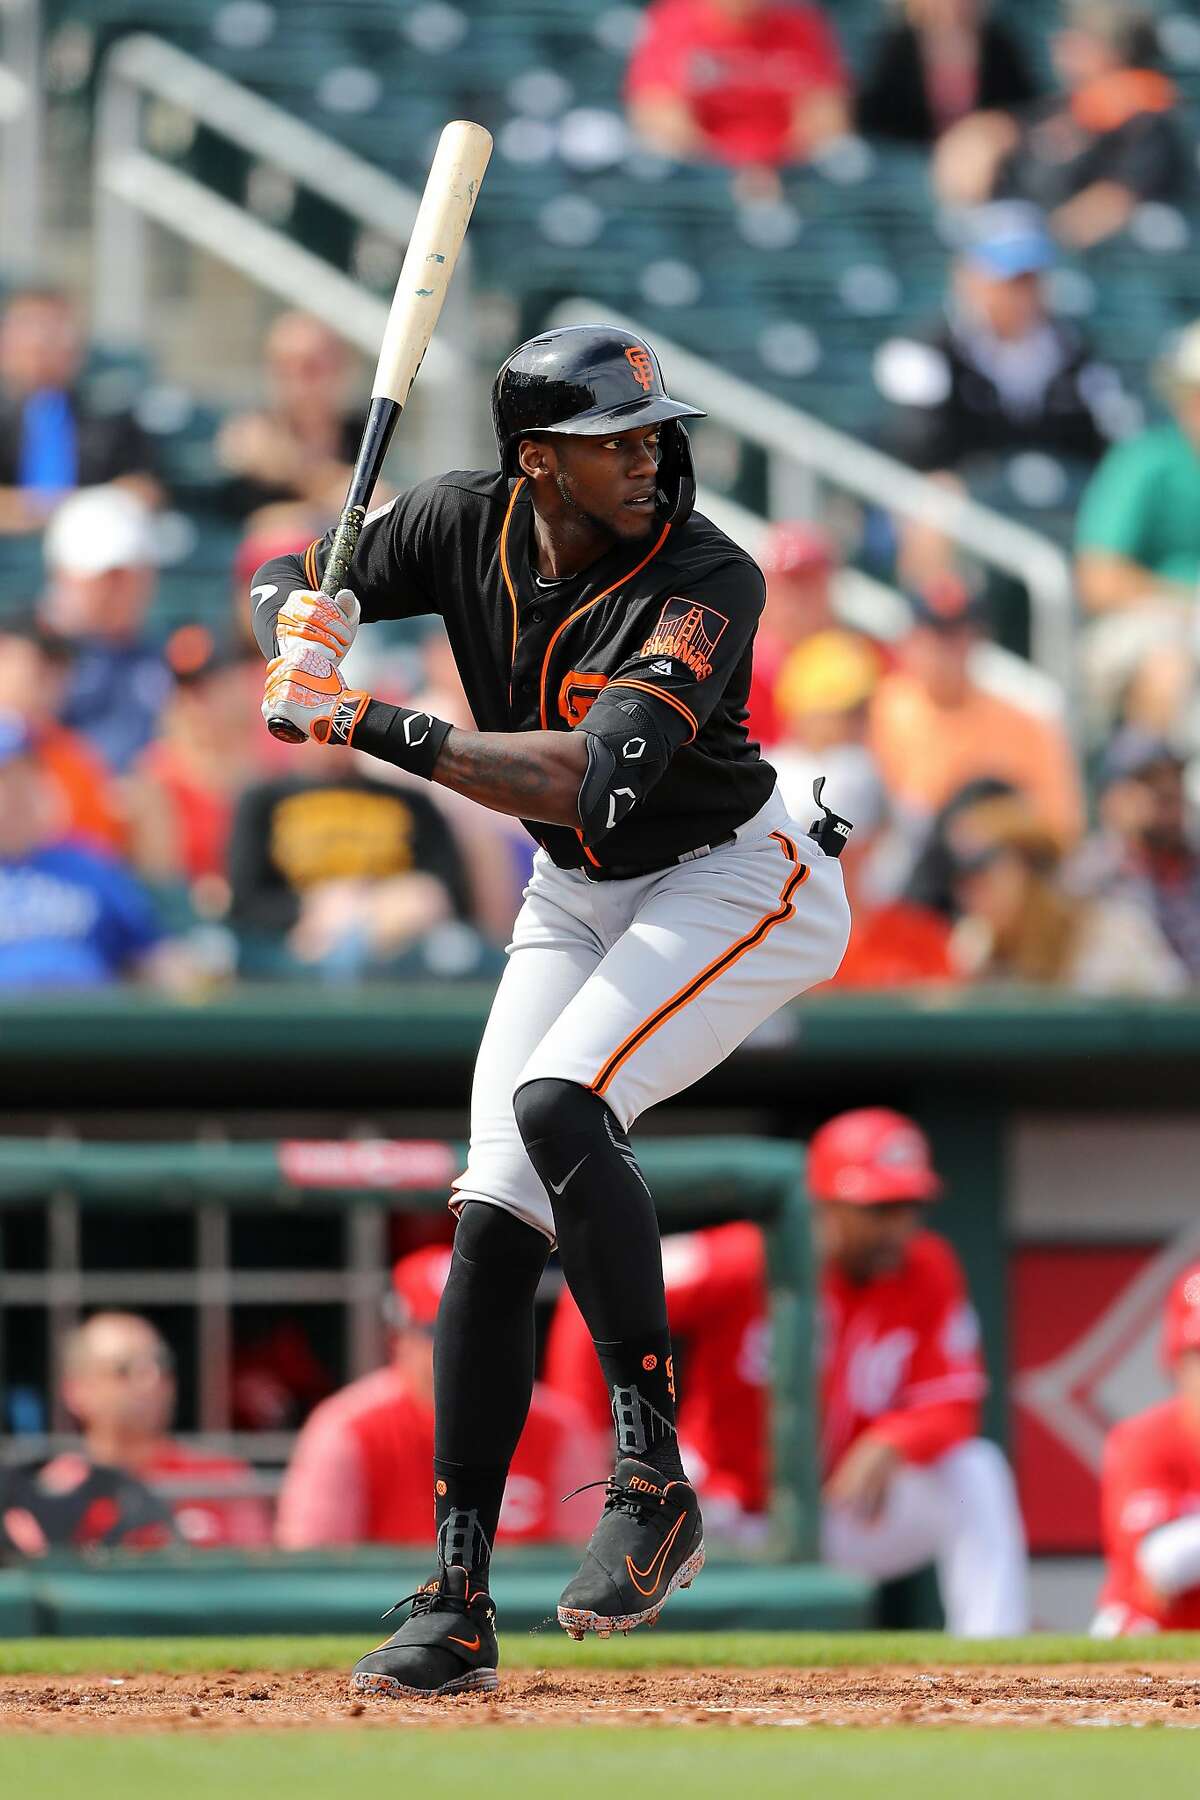 GOODYEAR, AZ - FEBRUARY 26: Cameron Maybin #5 of the San Francisco Giants bats during a Spring Training game against the Cincinnati Reds on Tuesday, February 26, 2019 at Goodyear Ballpark in Goodyear, Arizona. (Photo by Alex Trautwig/MLB Photos via Getty Images)